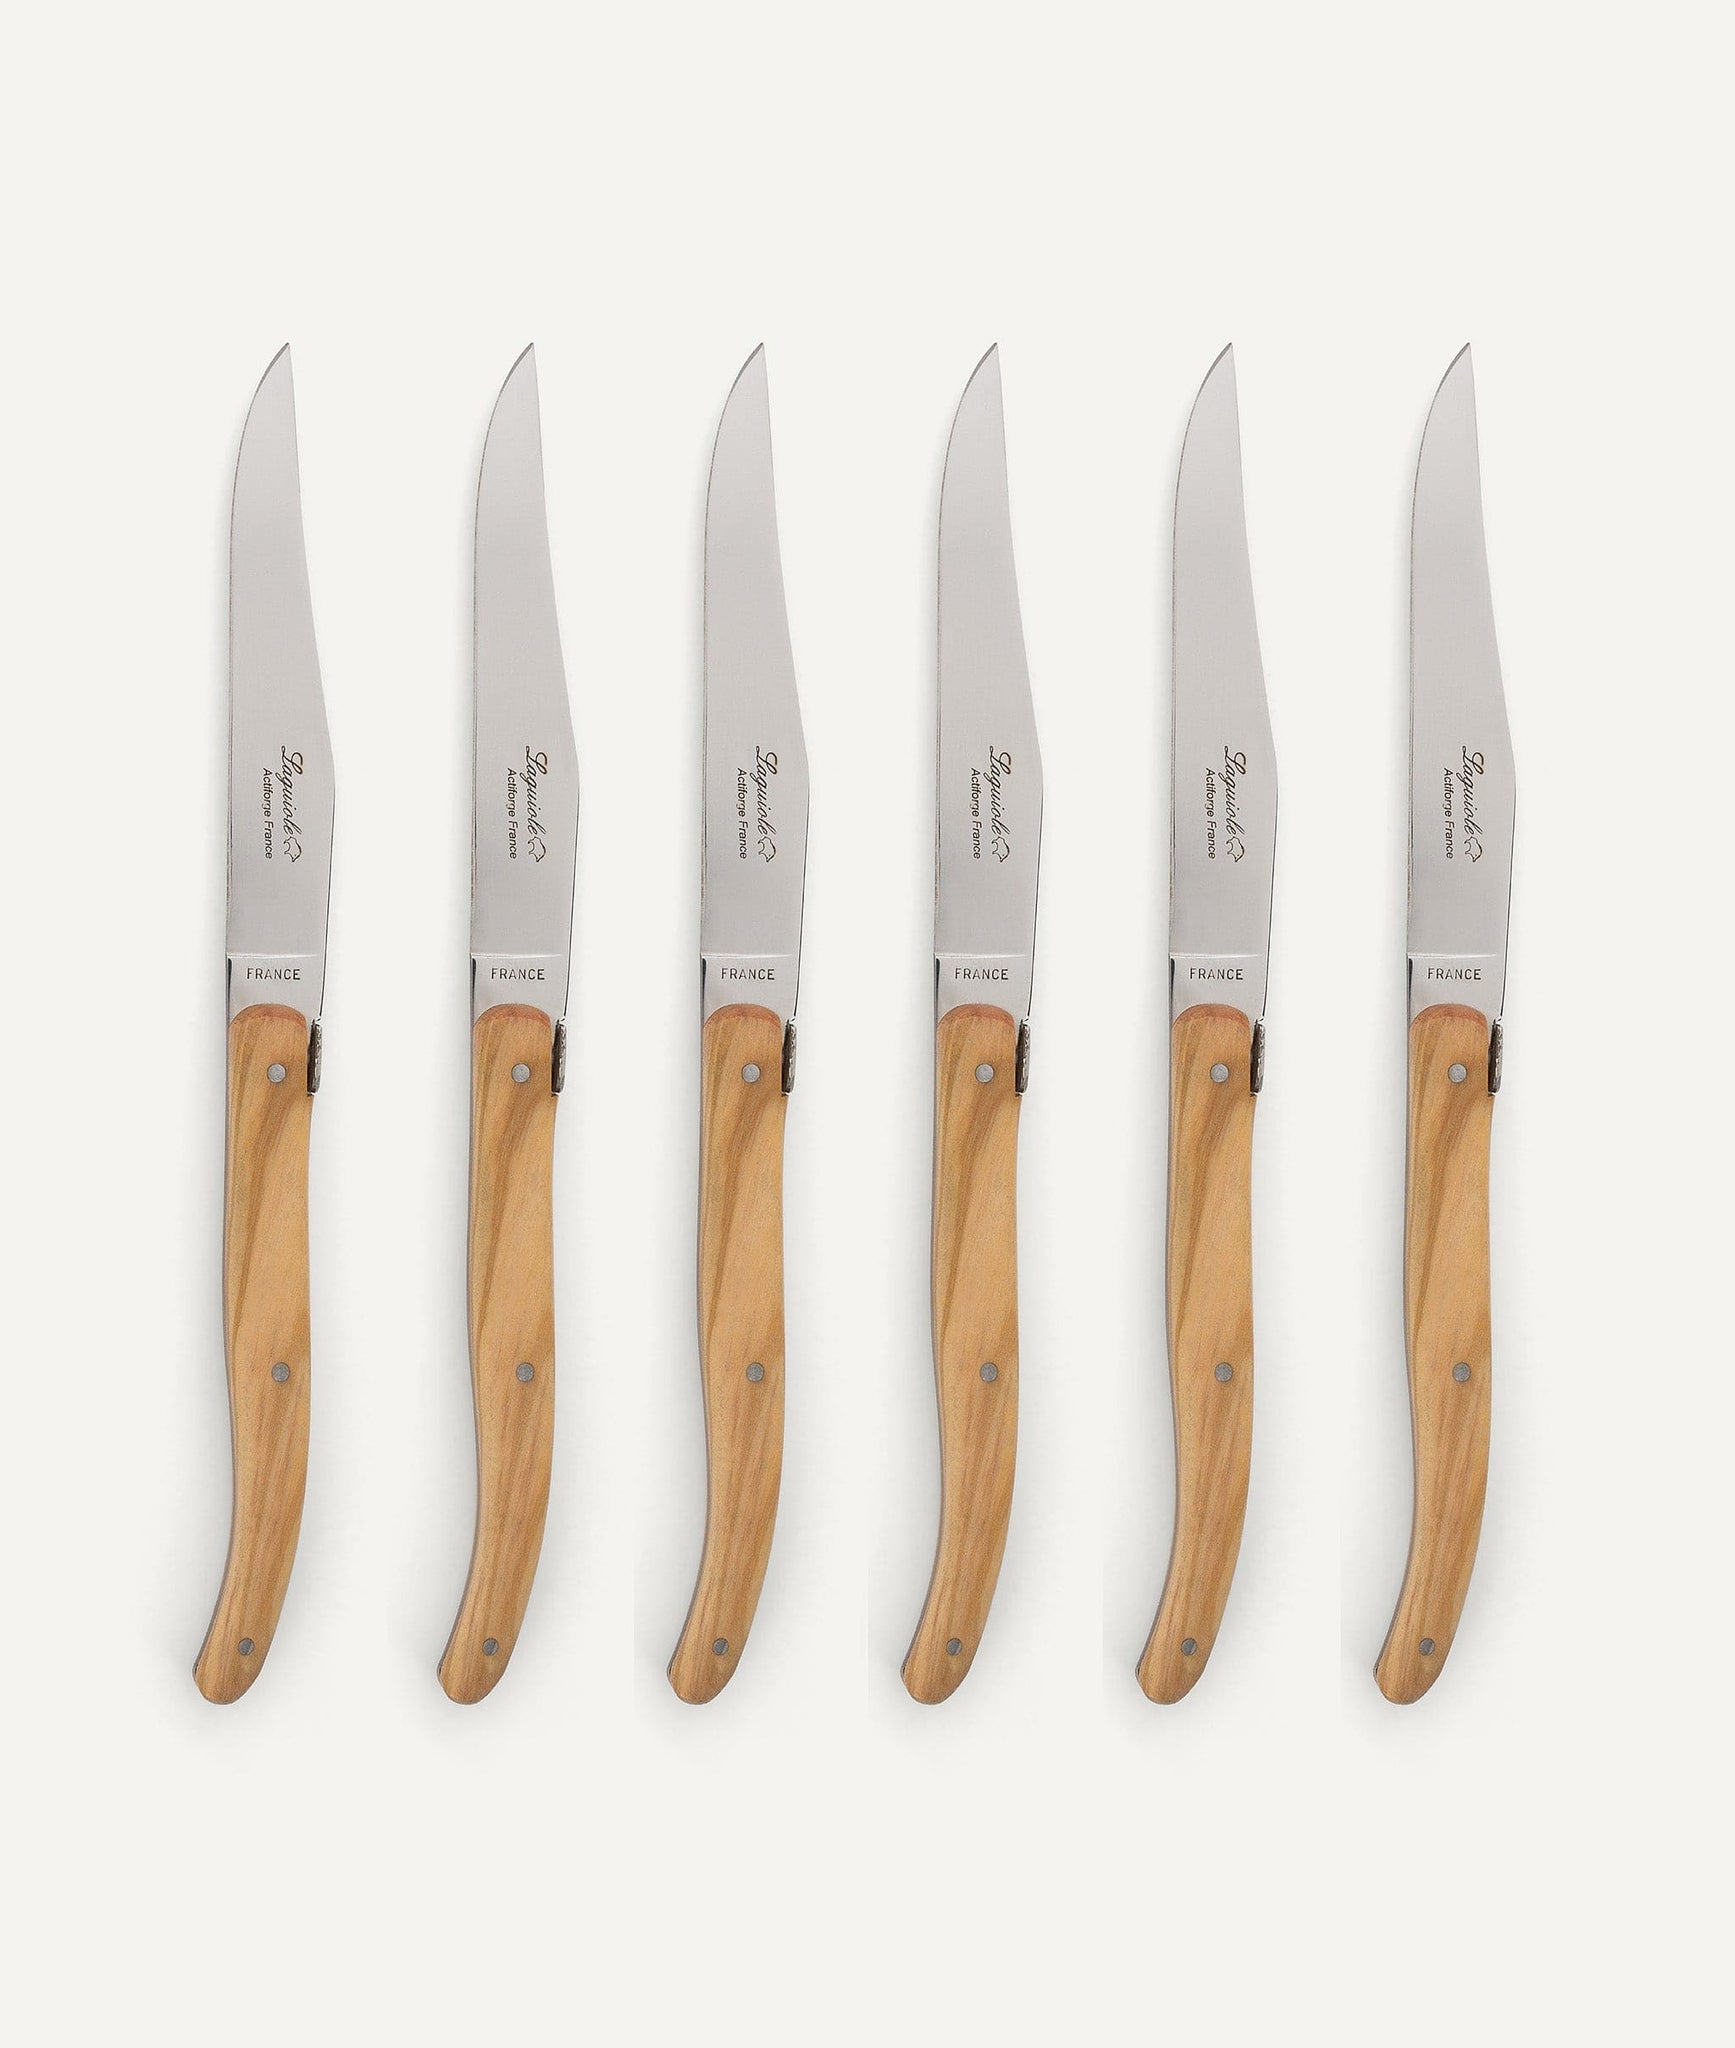 Knife with Olive Wood Handle in Stainless Steel - Set of 6